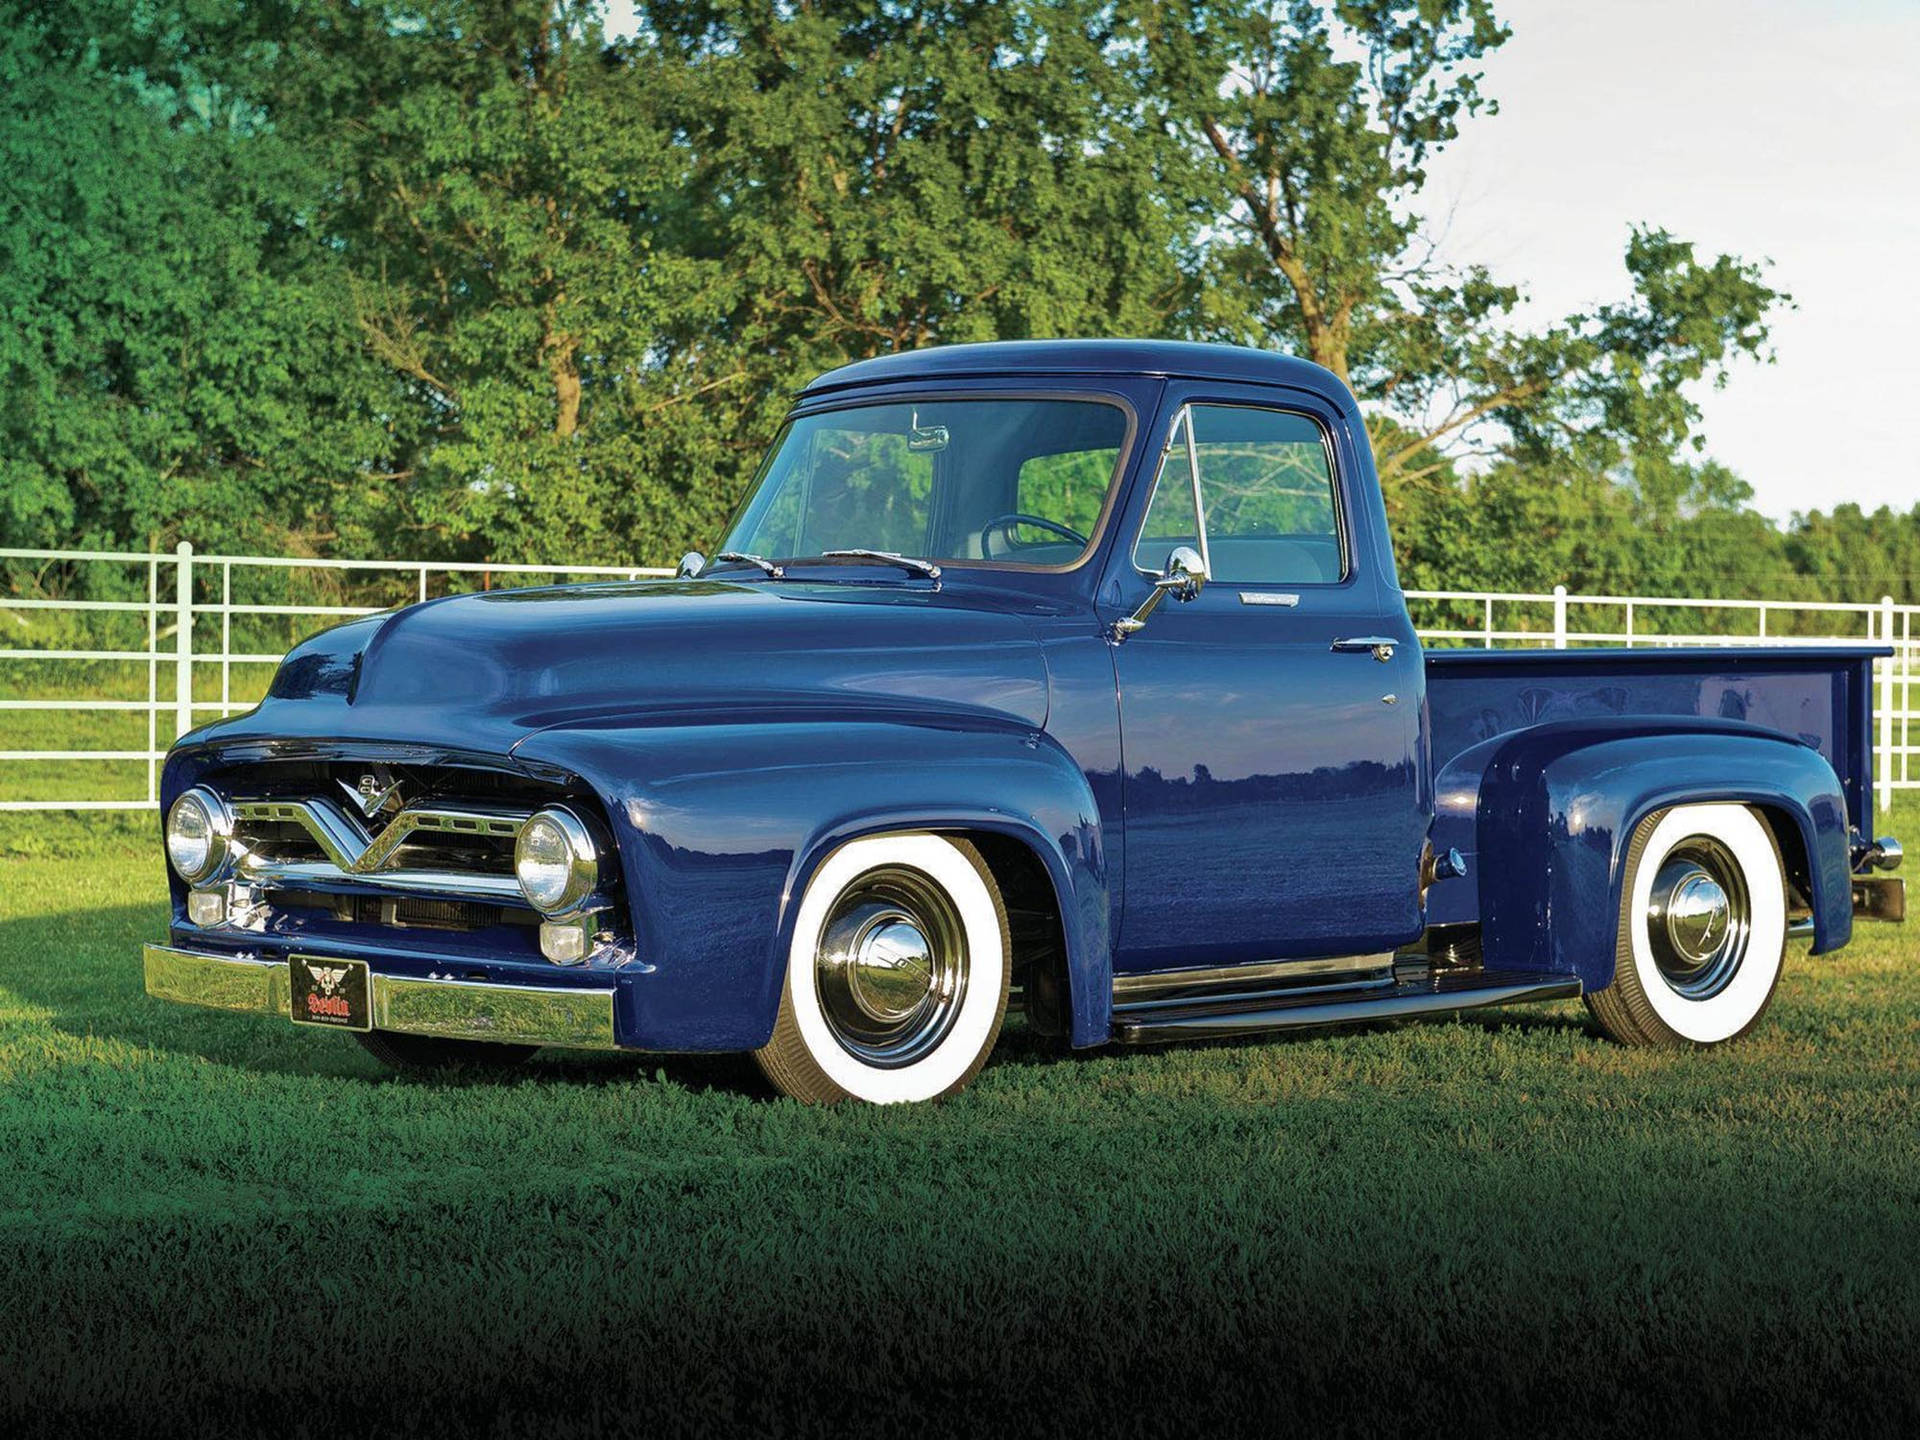 Metallic Blue Old Ford Truck